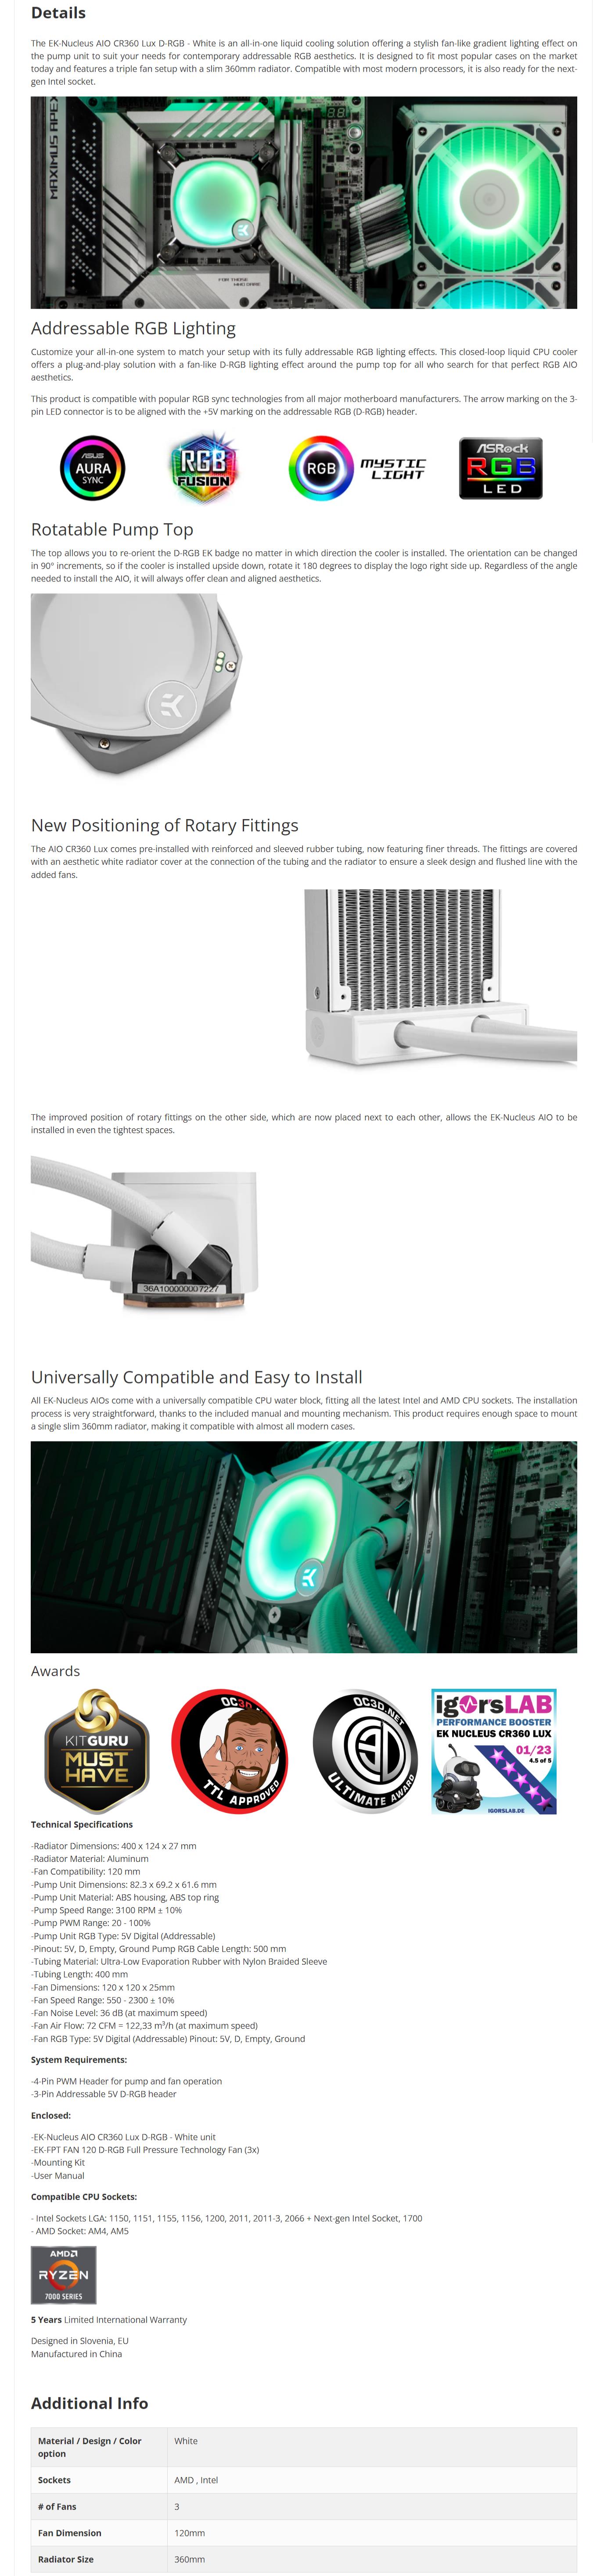 A large marketing image providing additional information about the product EK Nucleus 360mm Lux D-RGB AIO Liquid CPU Cooler - White - Additional alt info not provided